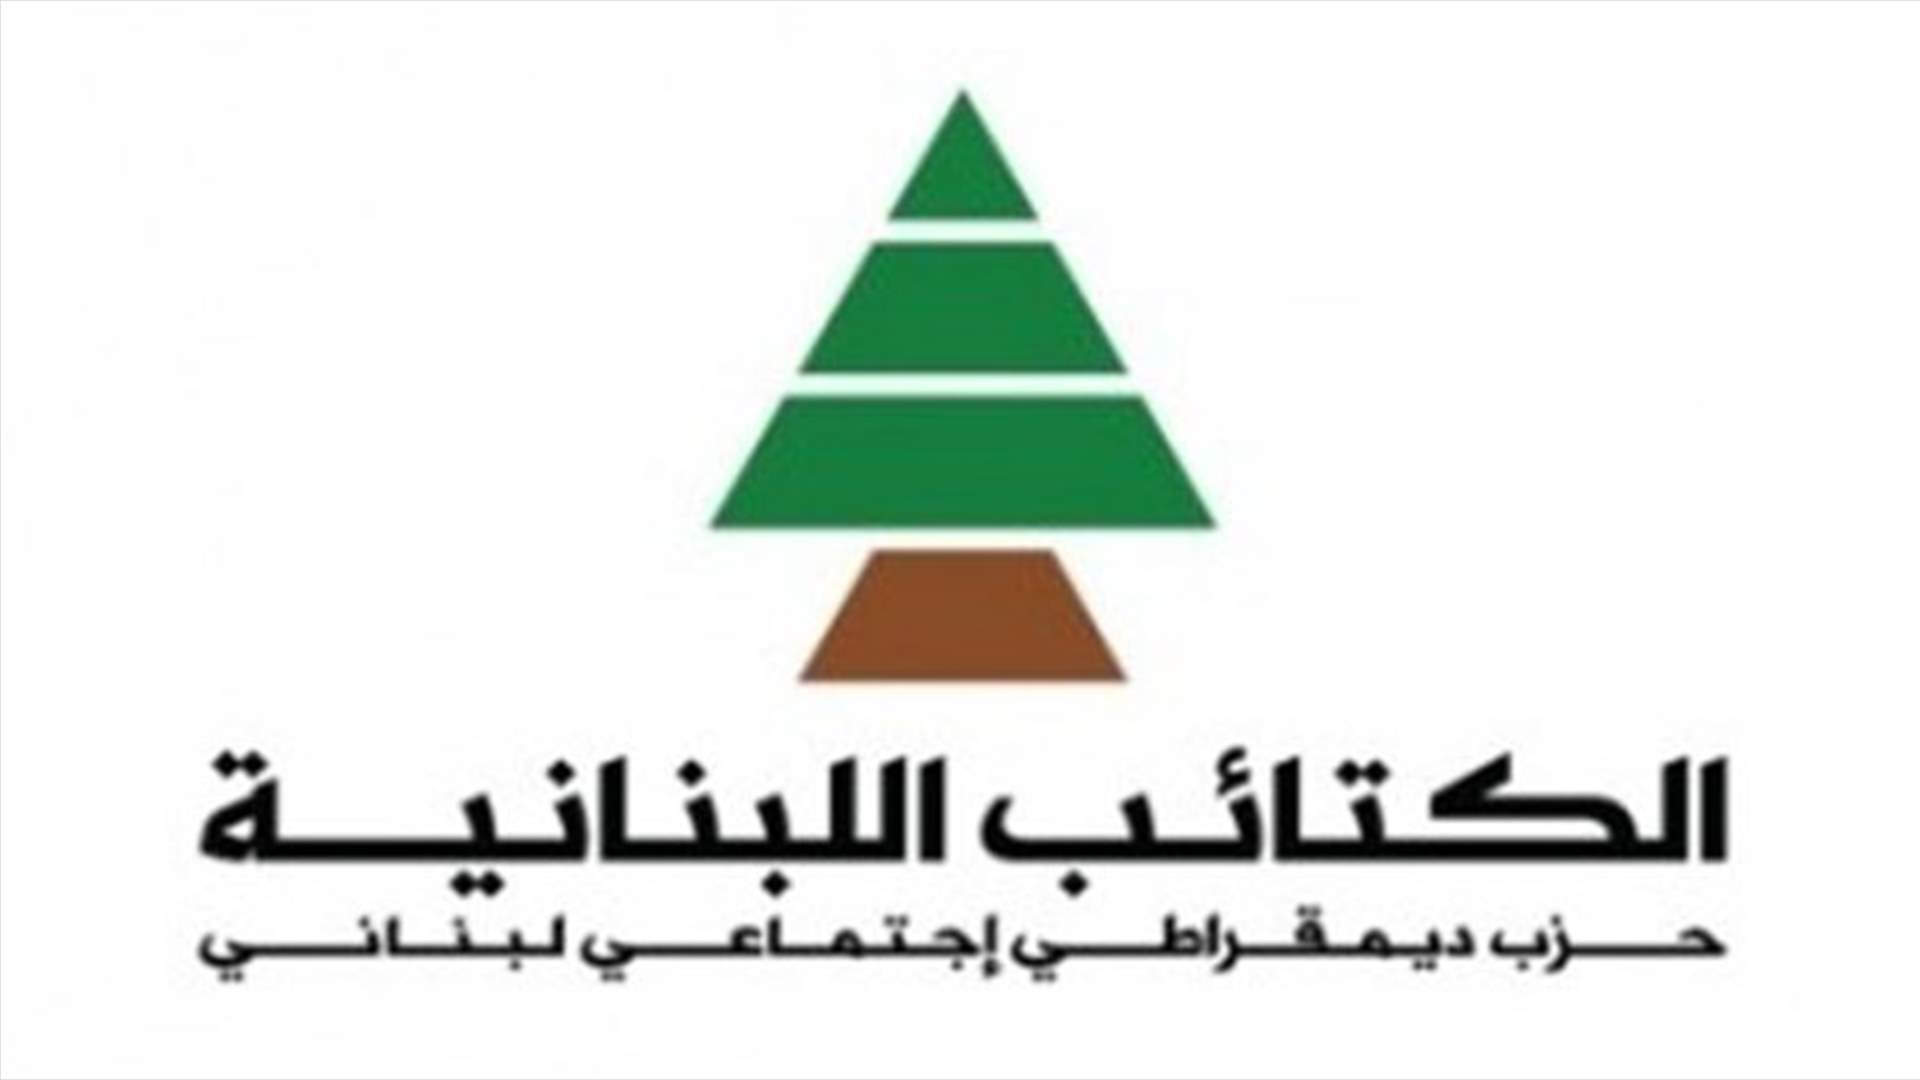 Kataeb party: Municipal polls should not be postponed for any reason whatsoever